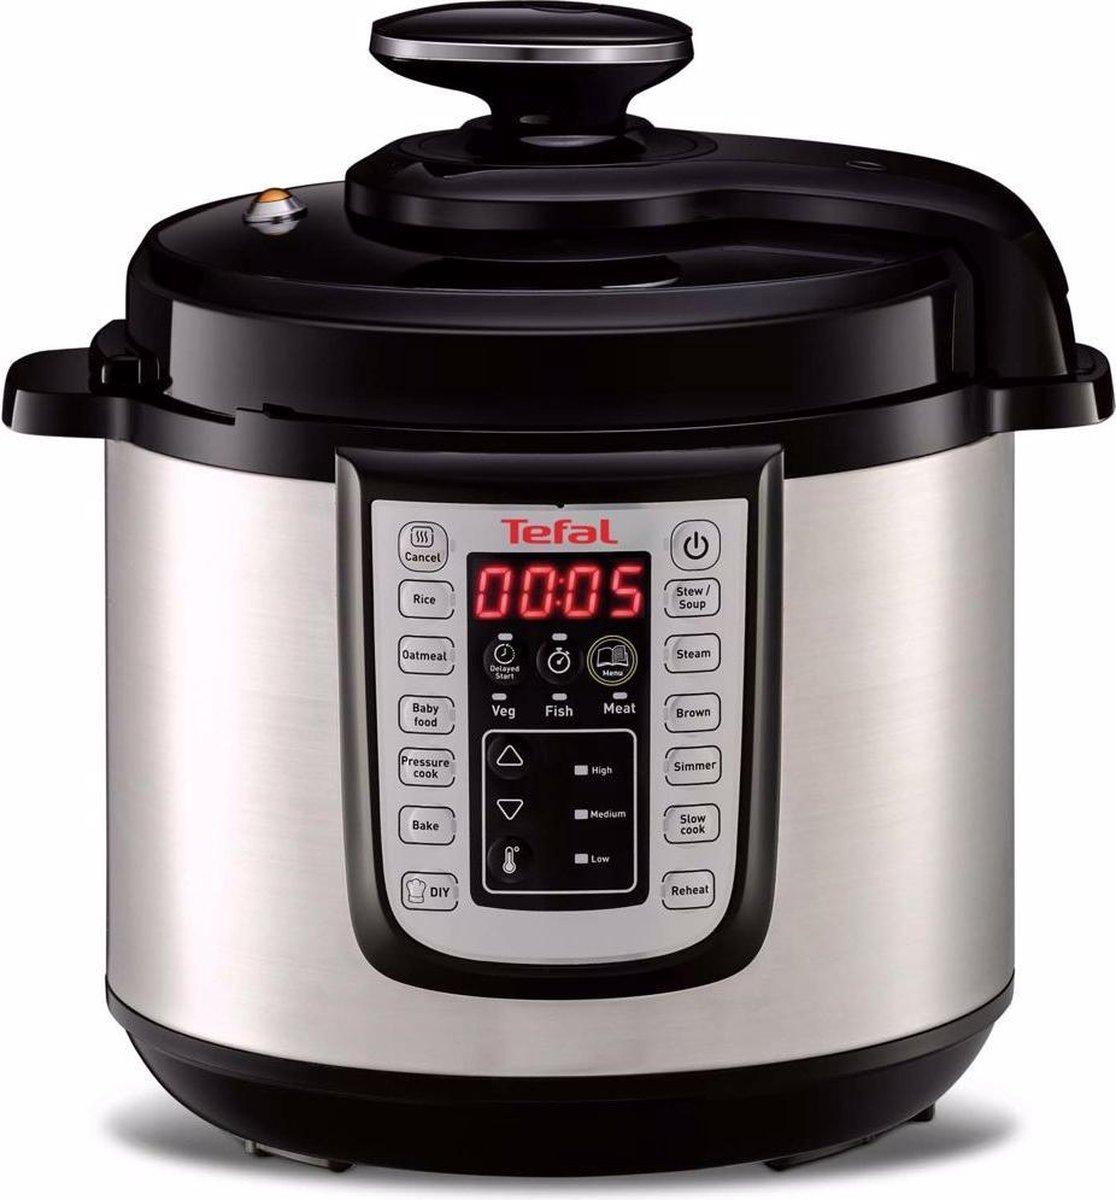 Tefal All-in-One Slowcooker